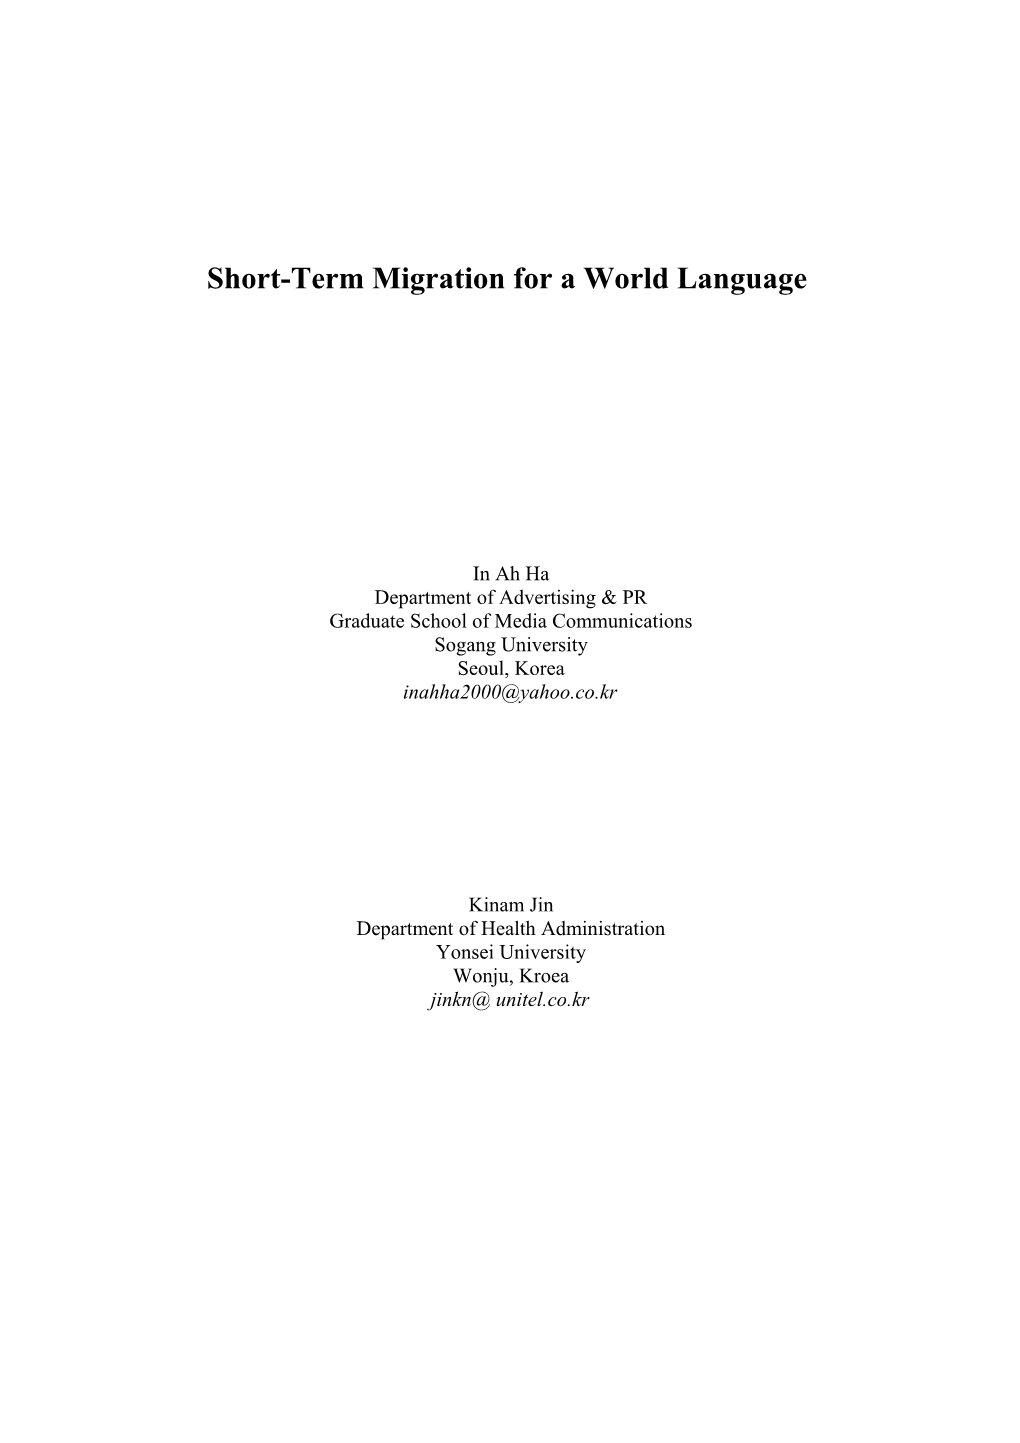 The Transnational Acquisition of a World Language